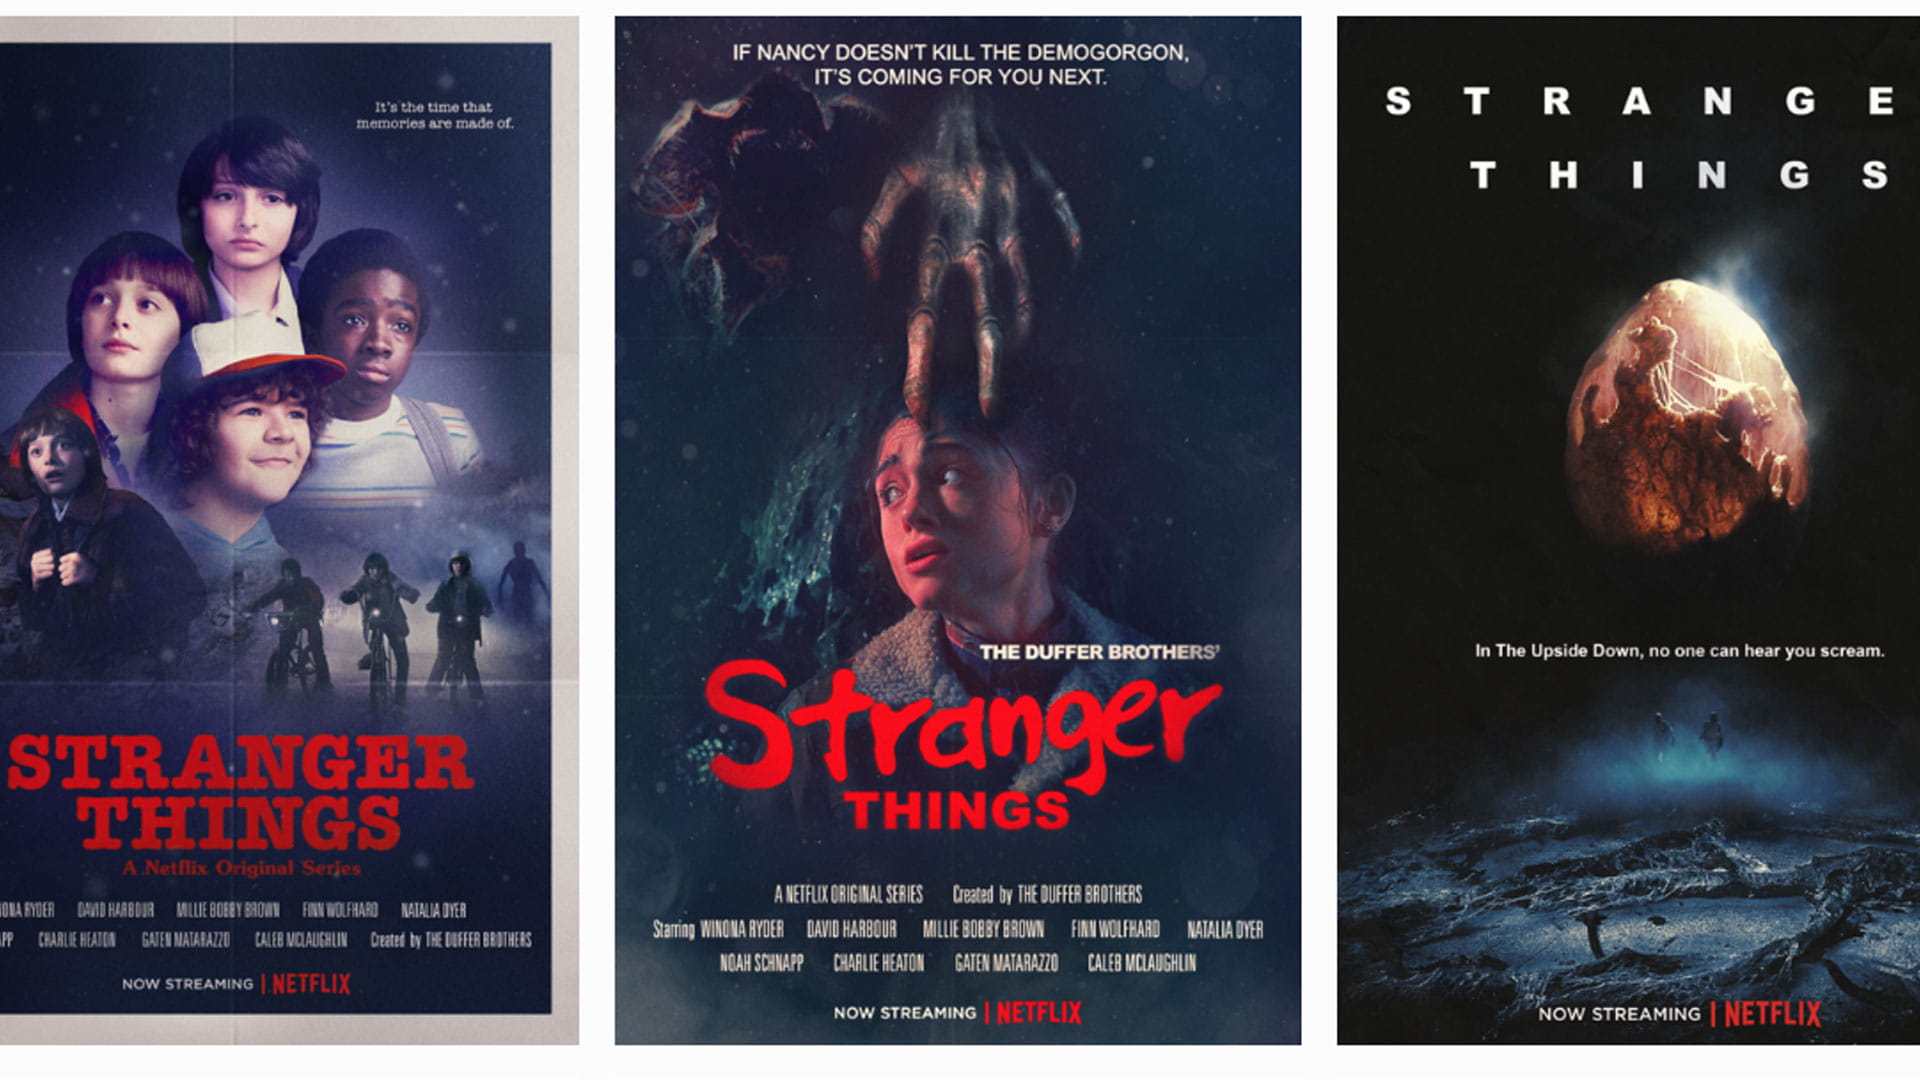 Some of the Stranger Things posters Roukema created.